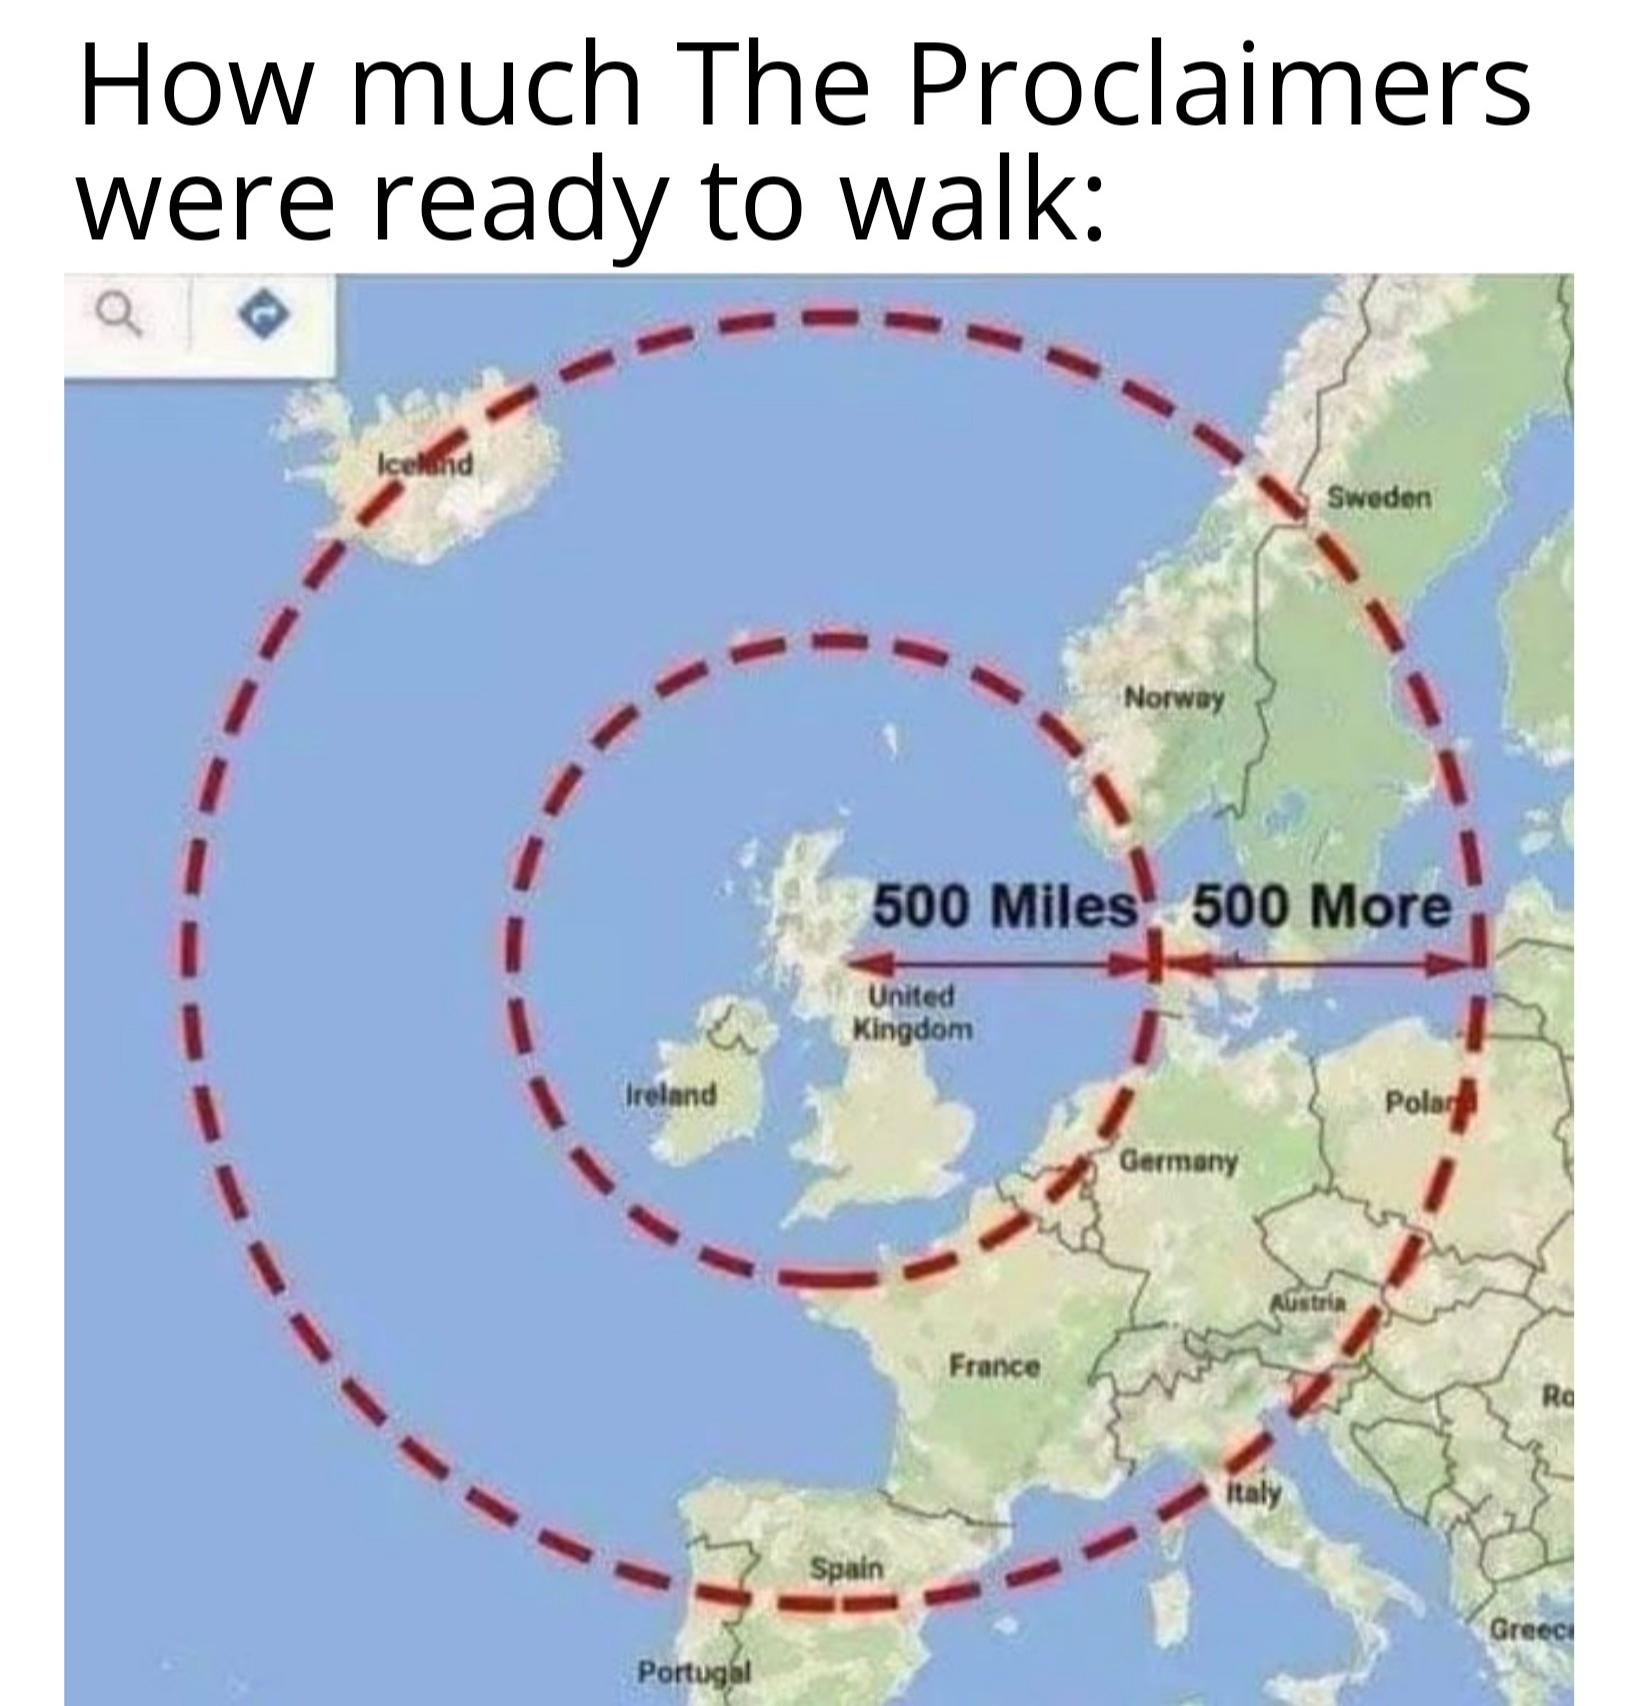 funny memes - dank memes - proclaimers meme - How much The Proclaimers were ready to walk I I Iceland I Ireland Portugal United Kingdom 500 Miles 500 More Spain Norway France Germany Sweden Austria italy Polar Ro Greec